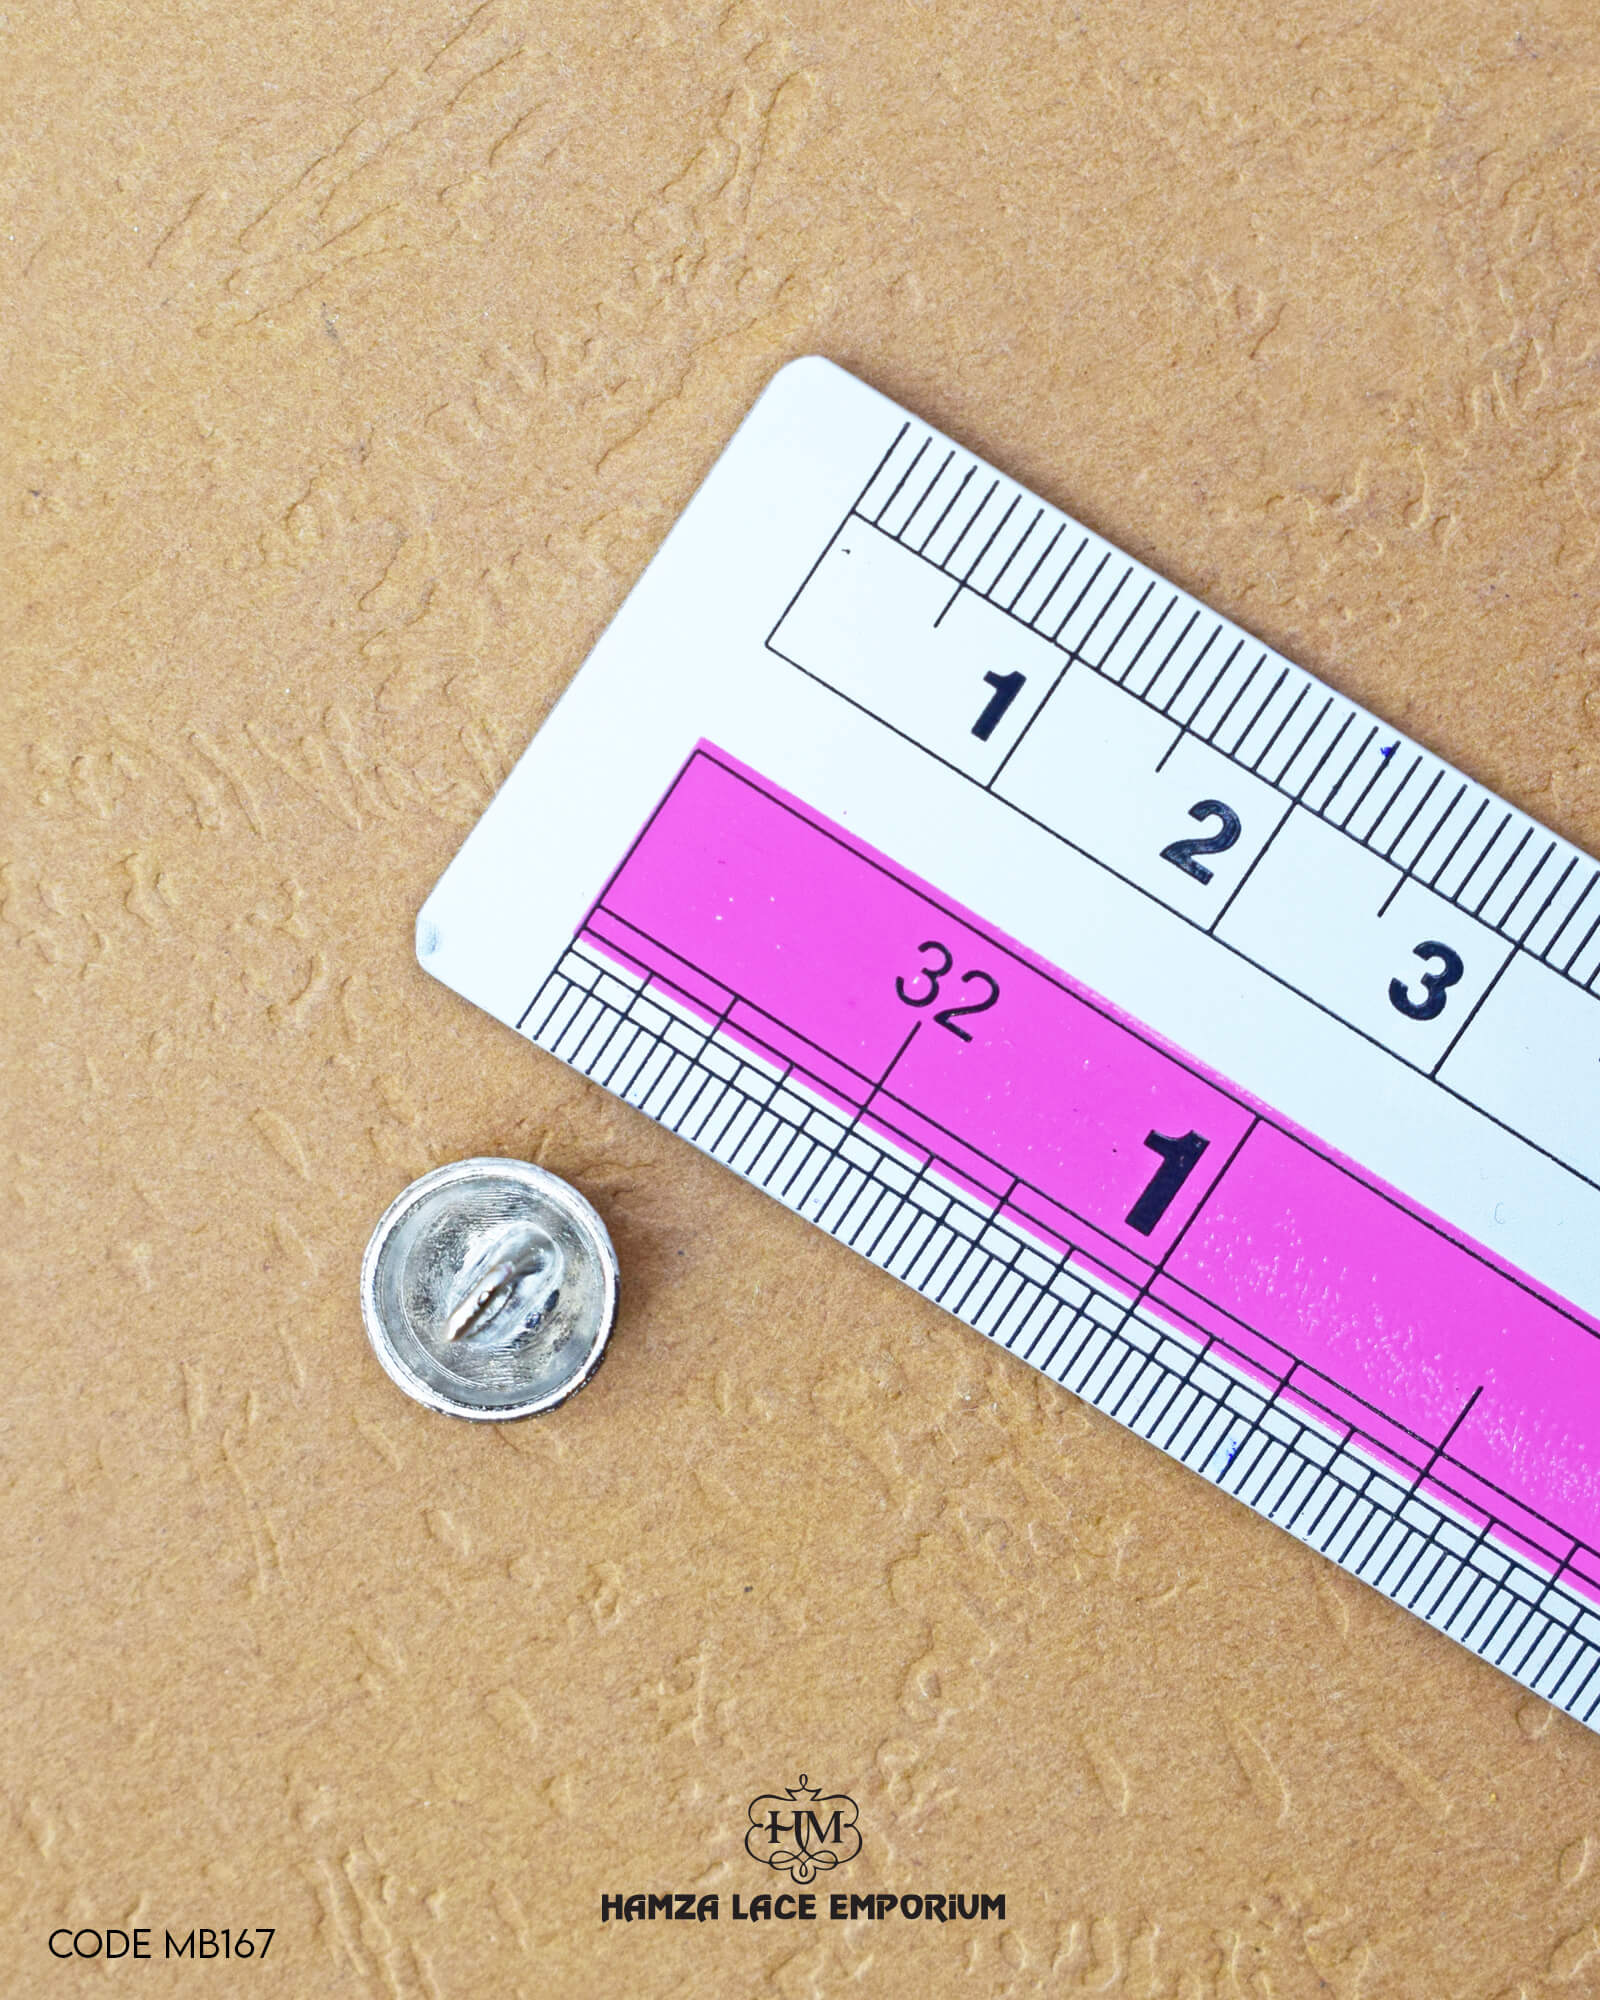 Size of the 'Silver Plane Metal Button MB167' is given with the help of a ruler